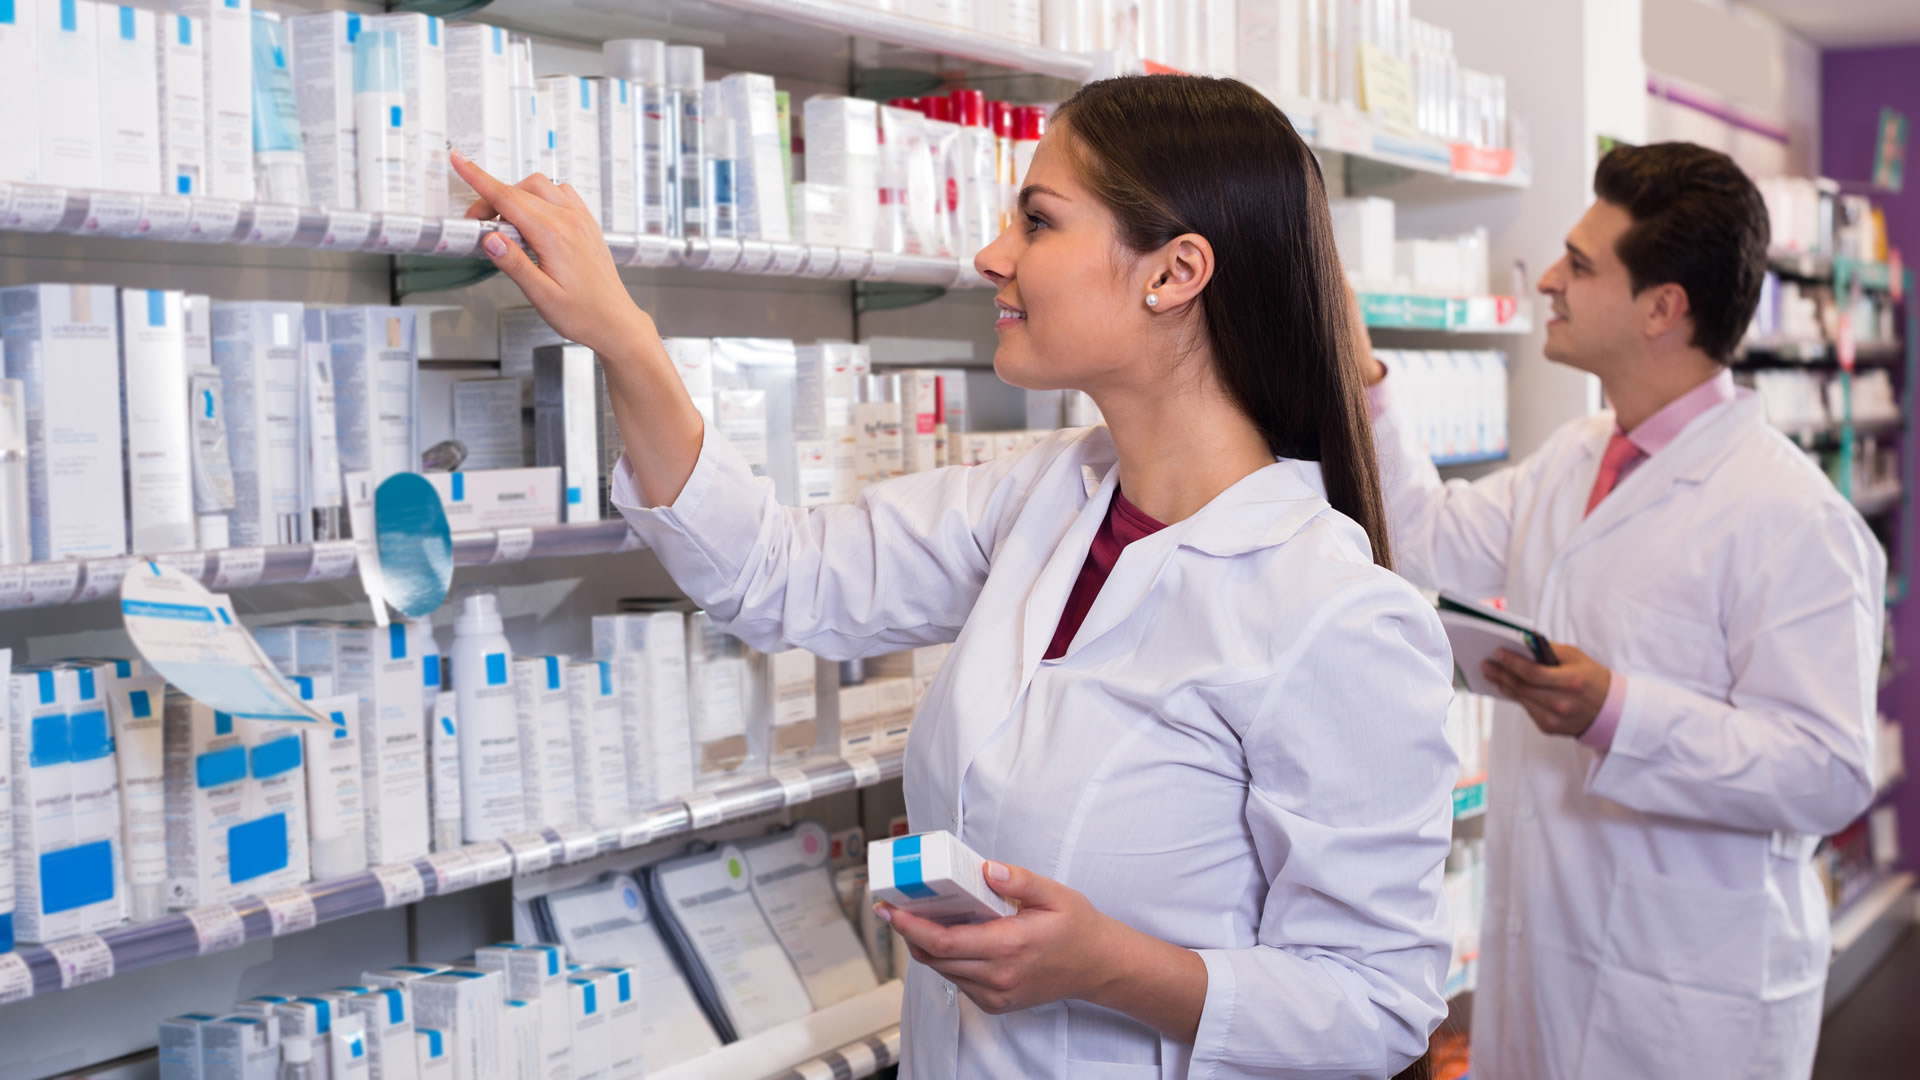 A female pharmacist assistant locates medication for a patient